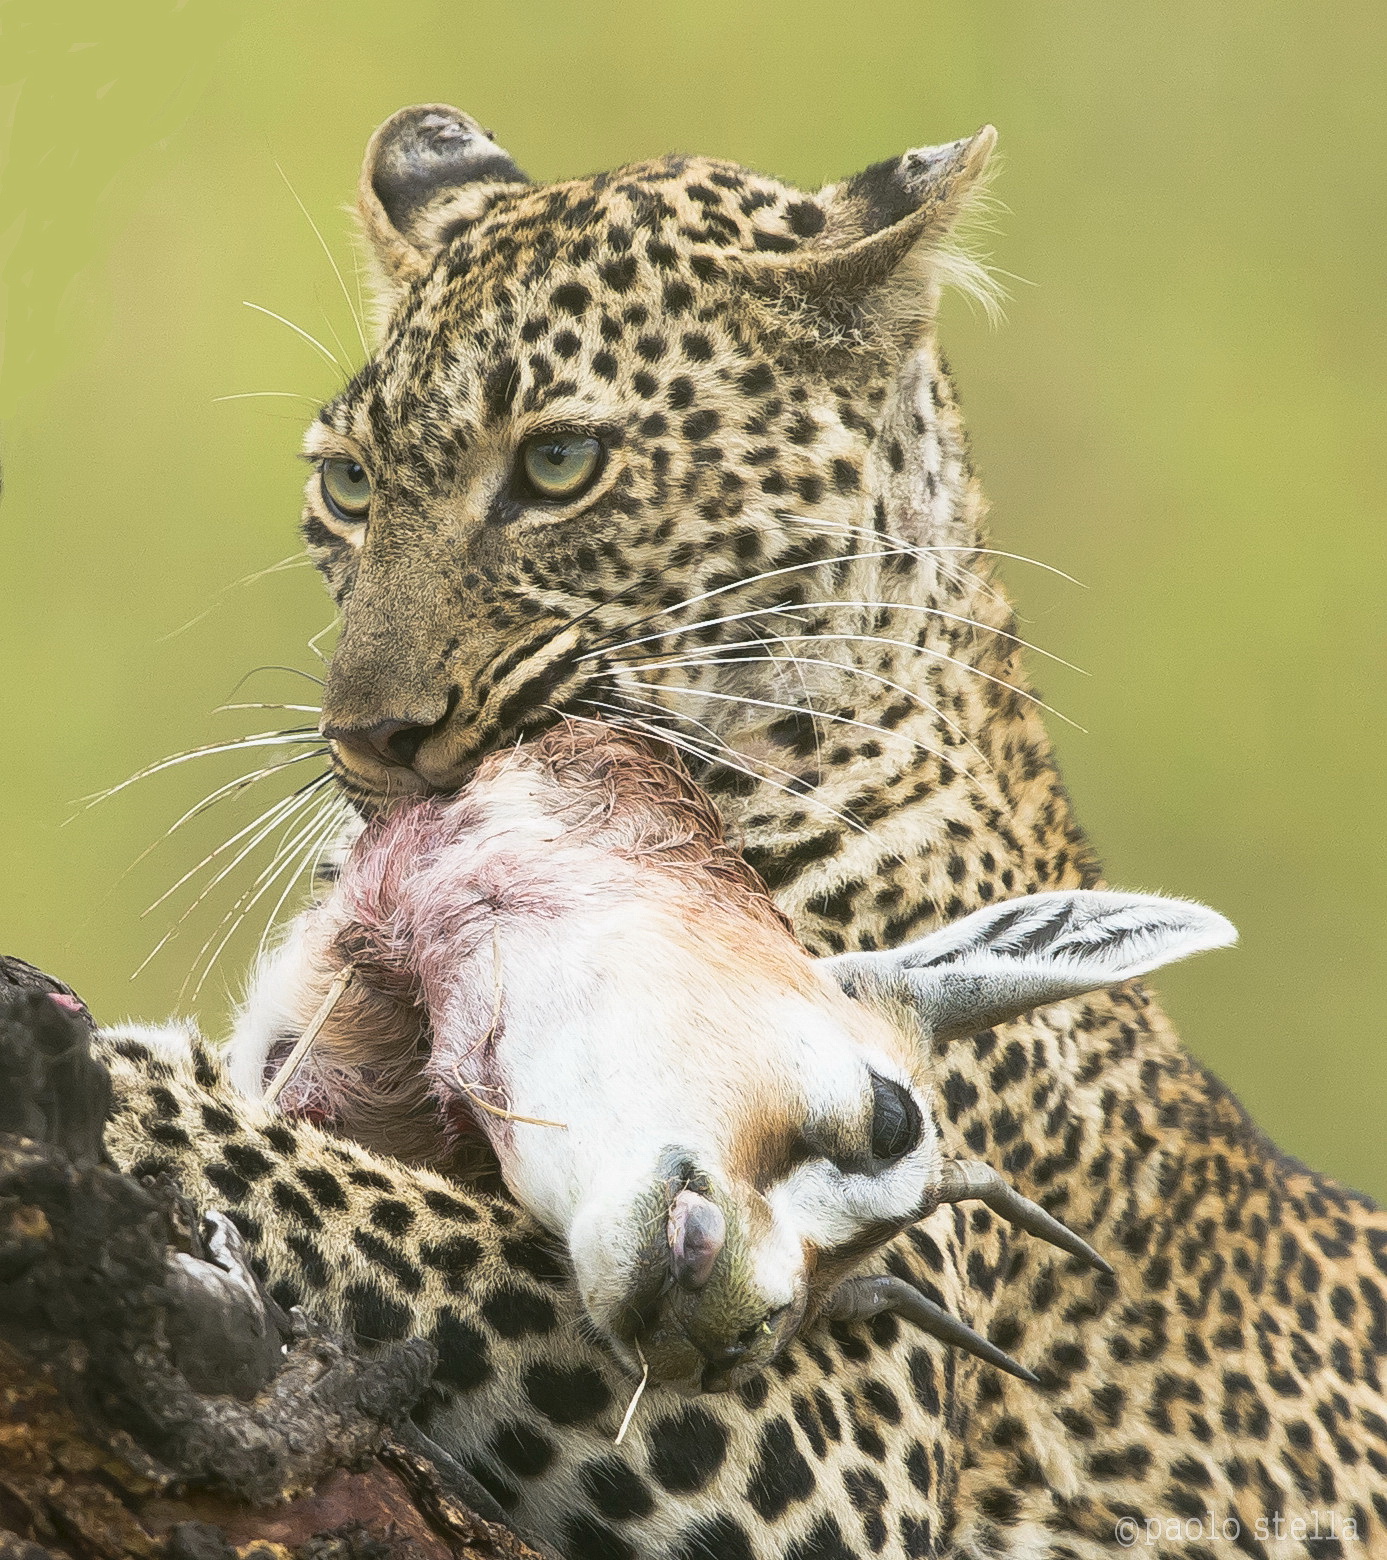 leopard and the kill close-up...